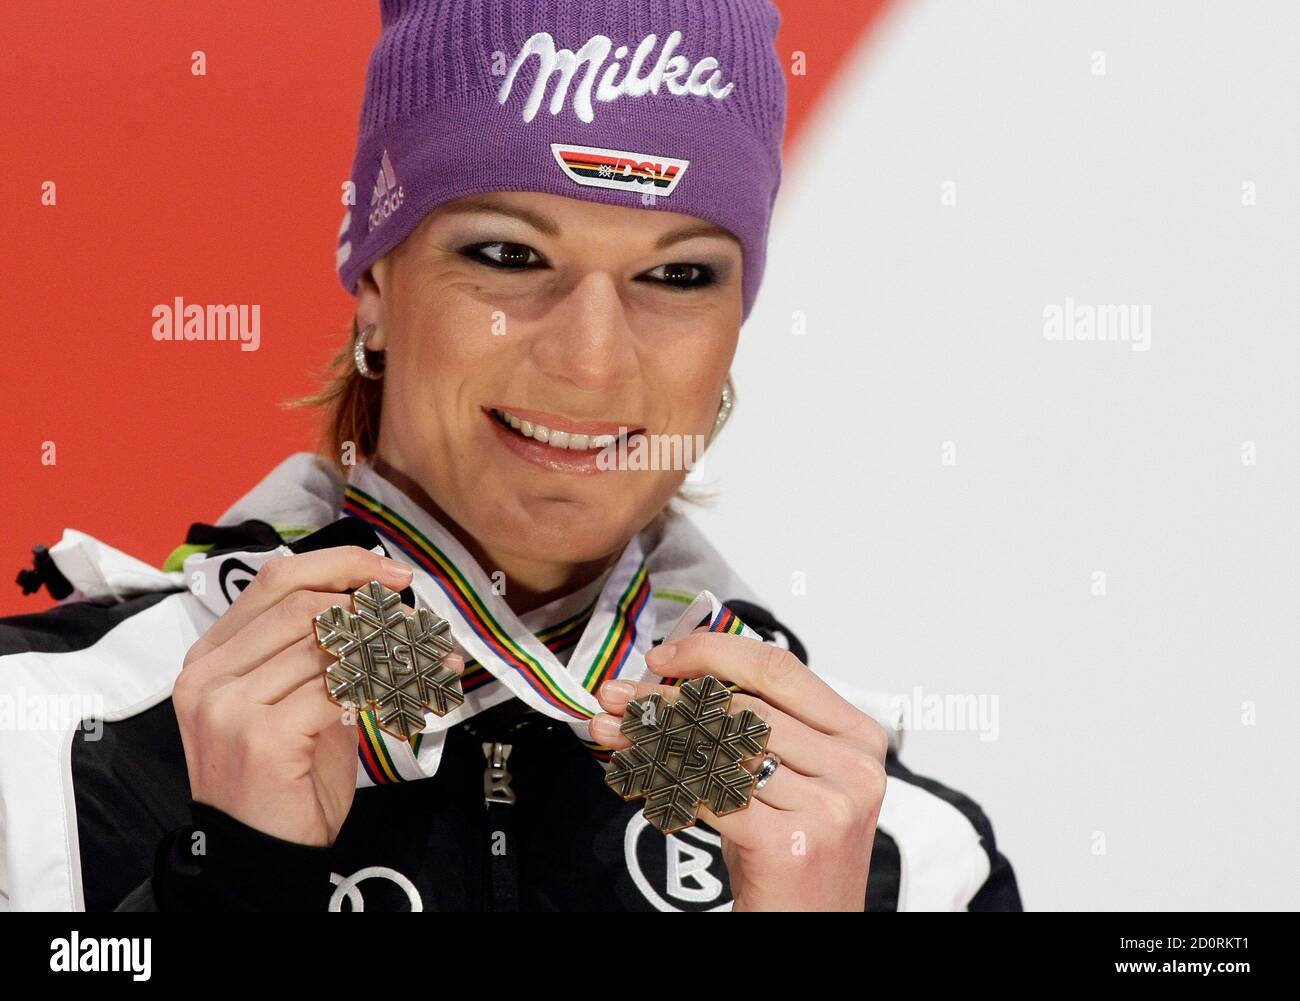 Maria Riesch of Germany poses with her Super-G and Downhill bronze medals following the women's Downhill at the Alpine Skiing World Championships in Garmisch-Partenkirchen February 13, 2011.           REUTERS/Dominic Ebenbichler (GERMANY  - Tags: SPORT SKIING) Banque D'Images